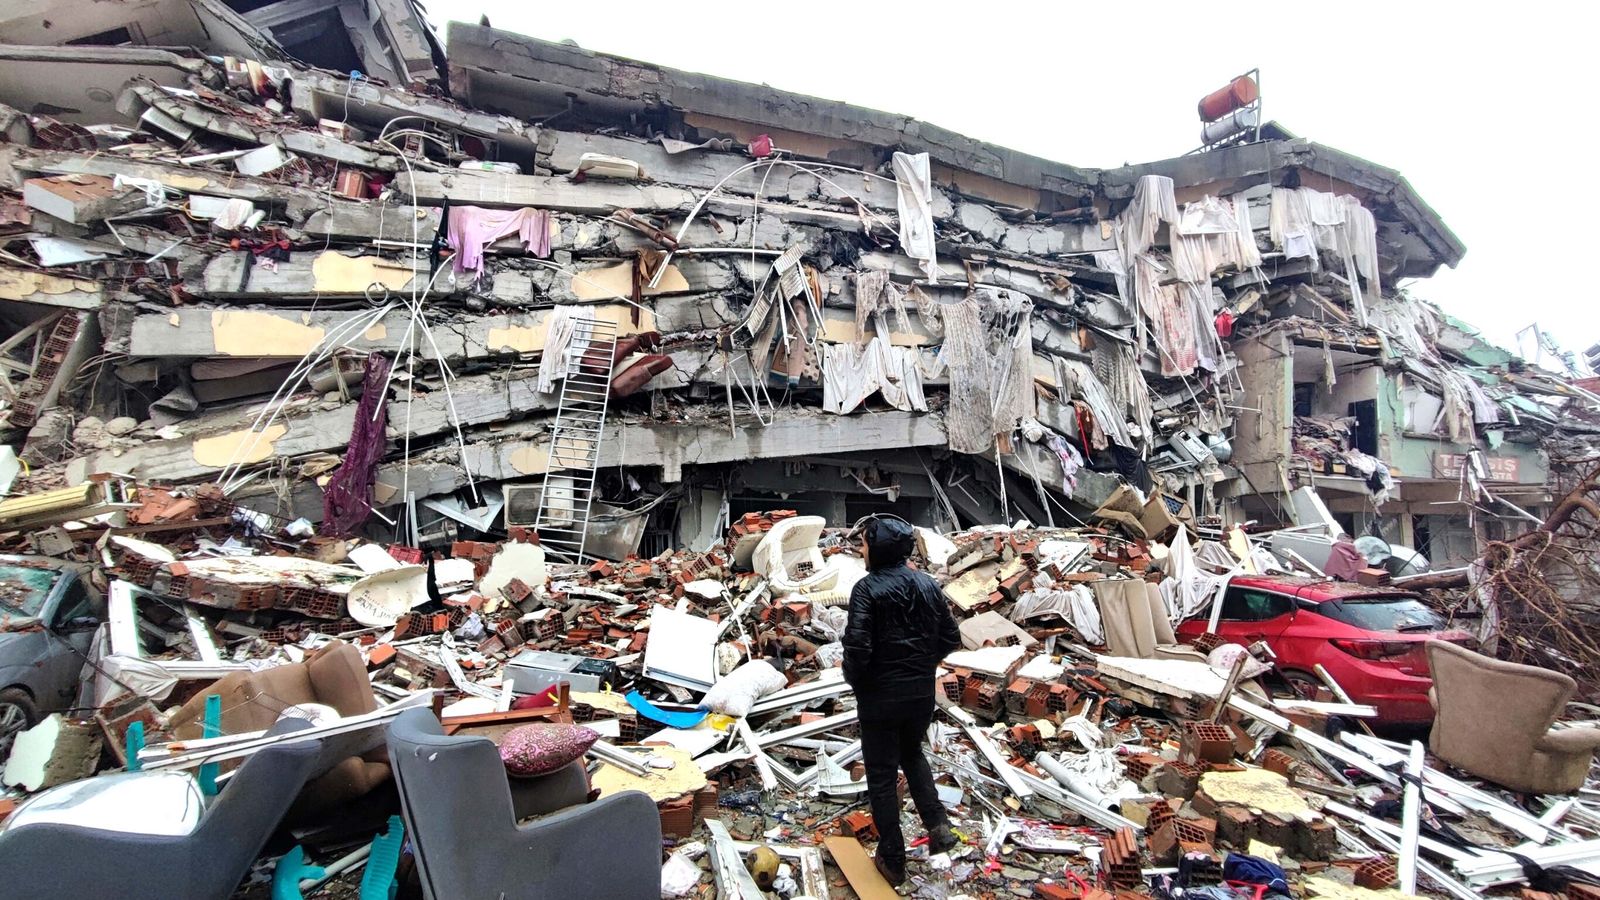 Why was the destruction to buildings in Turkey so catastrophic?